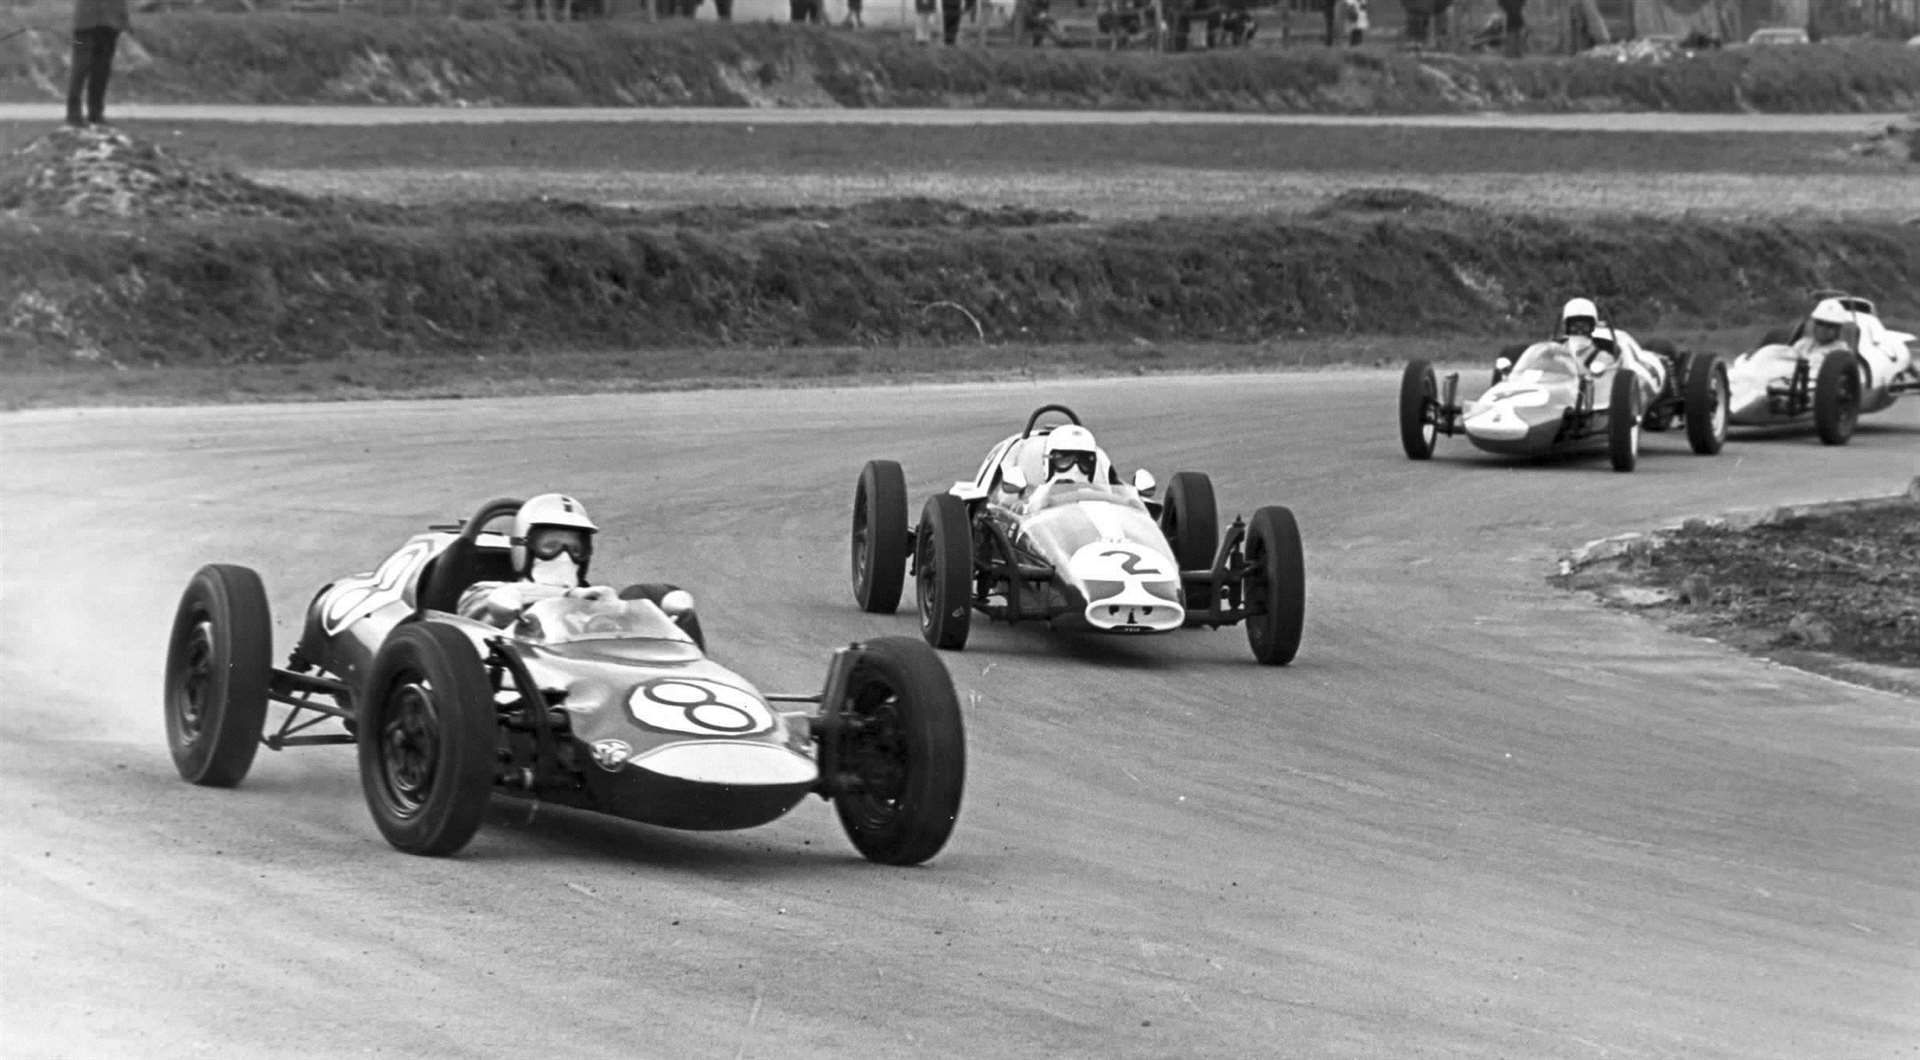 Single-seater drivers plough into the Devil's Elbow at Lydden Hill in 1969